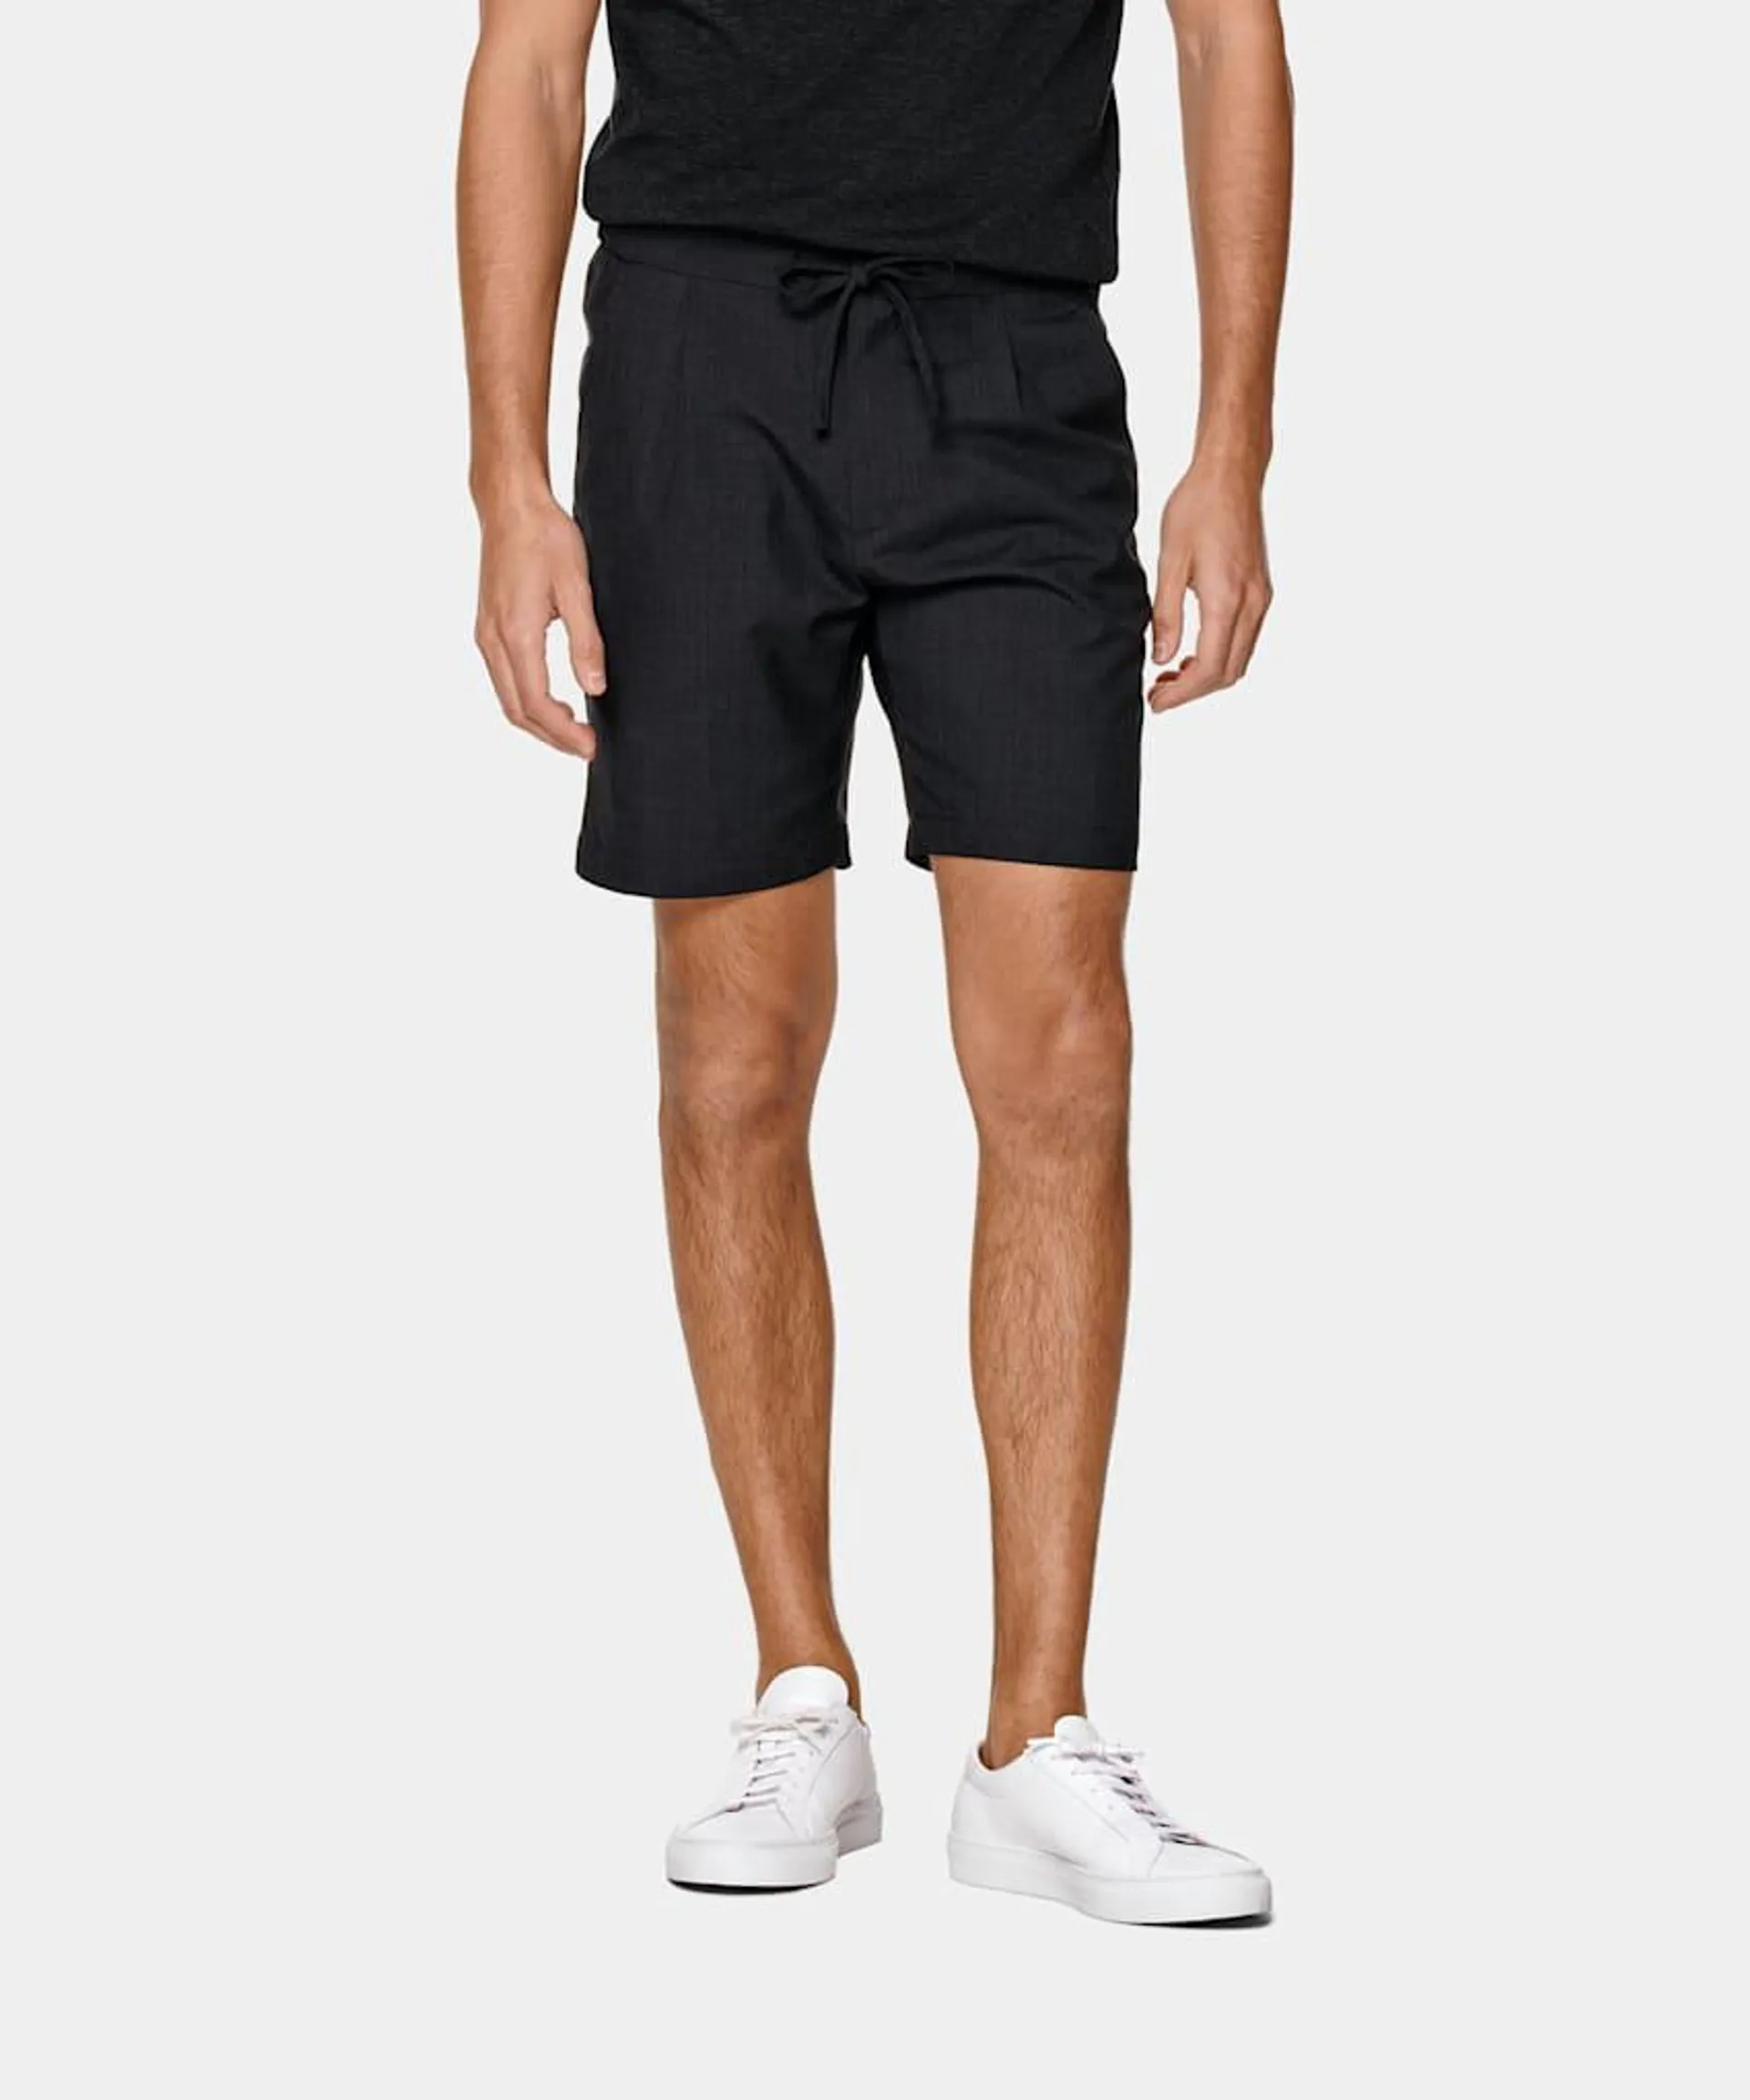 Tailored slim to mid-thigh, with a single pleat an elastic waistband for maximum comfort, these dark grey Ames shorts are made to get you through the season in casually refined style.